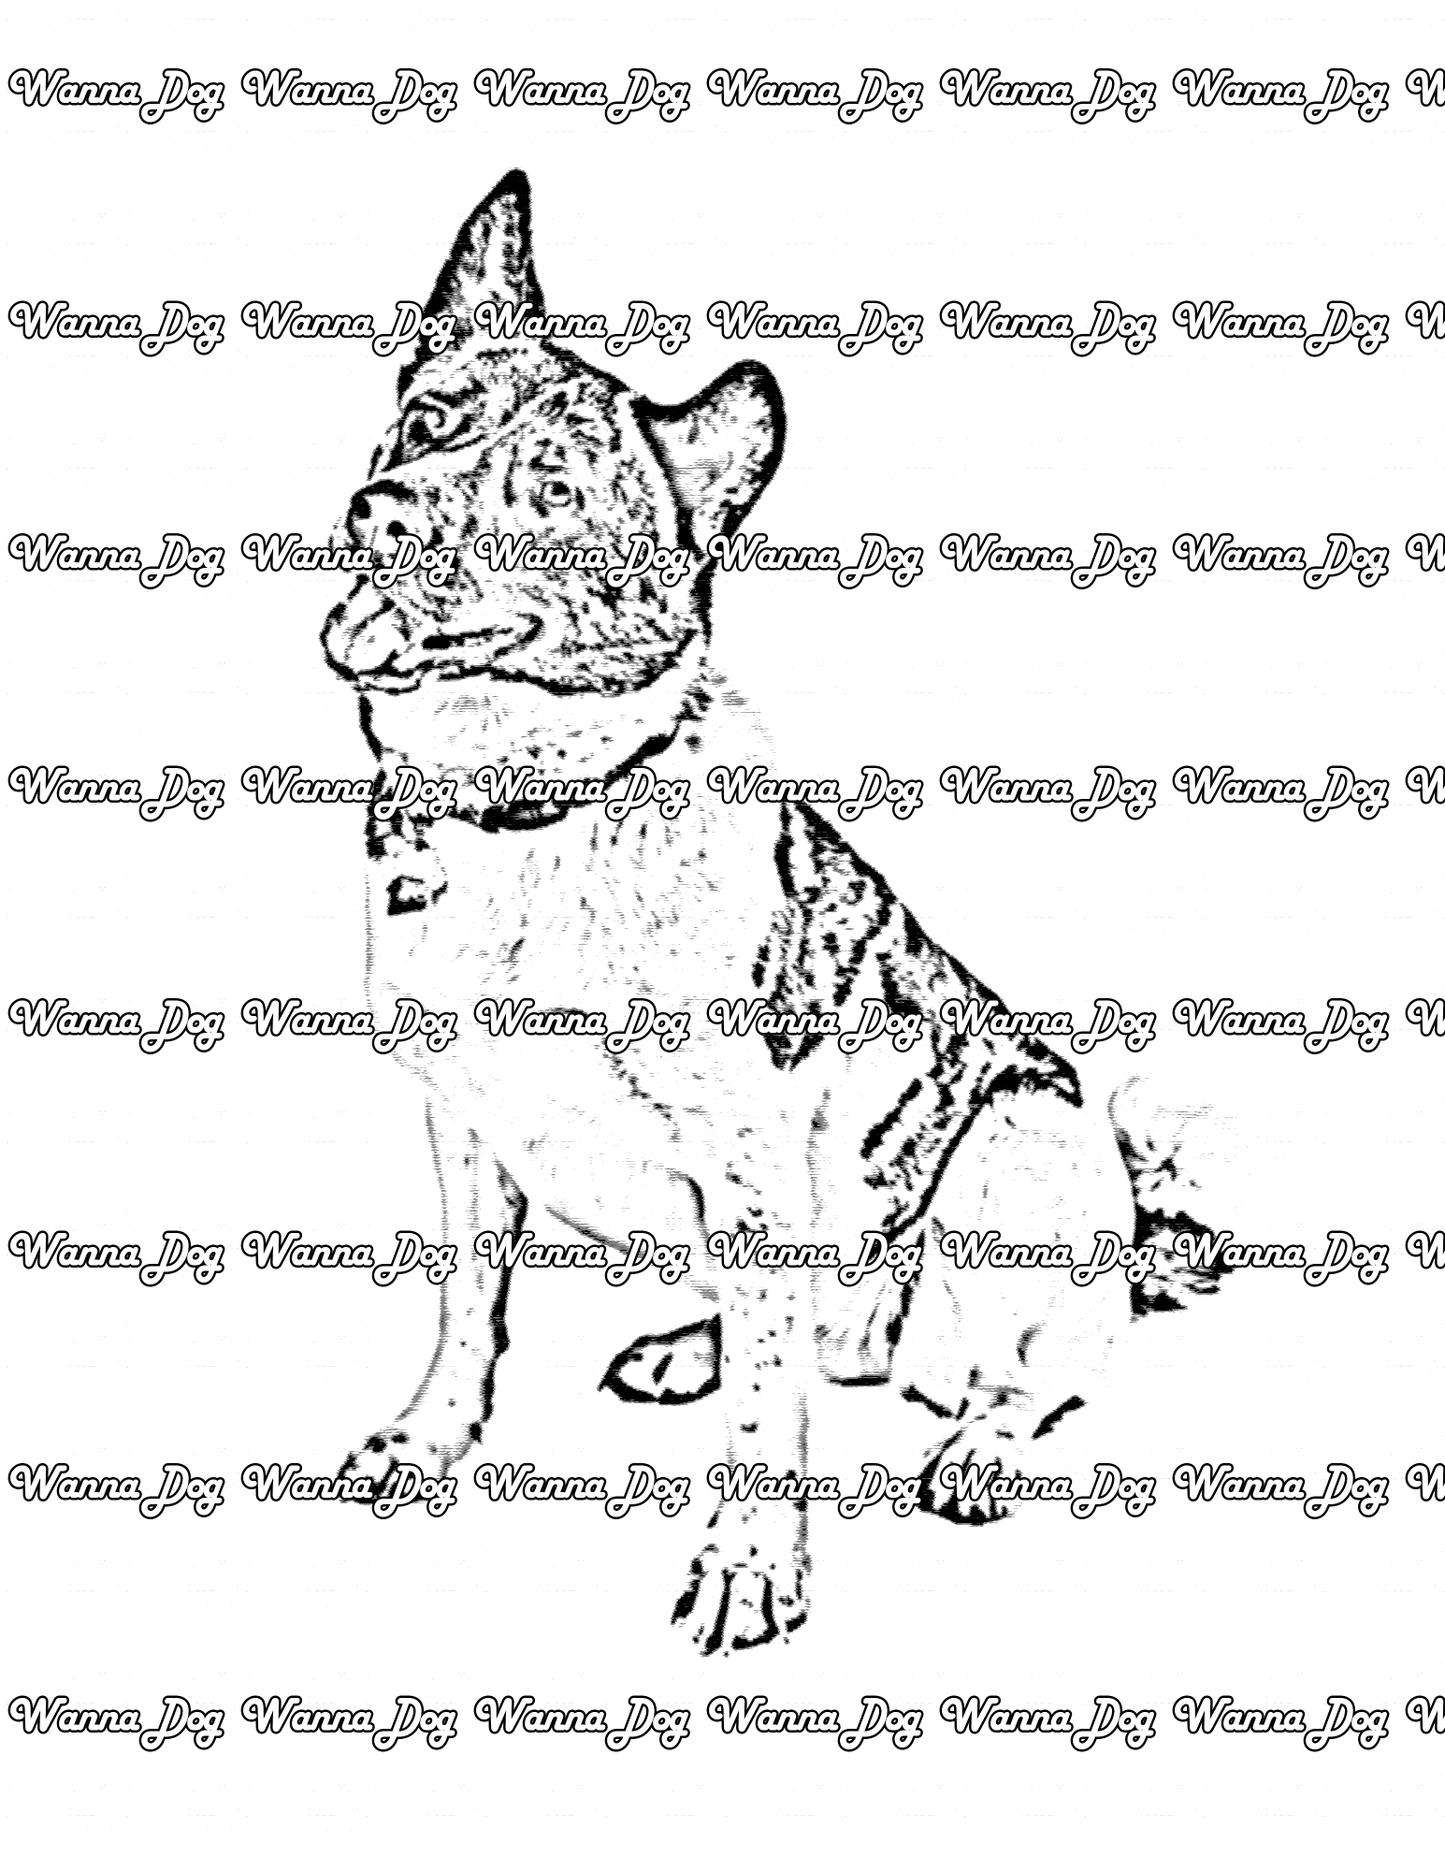 Akita Coloring Page of a Akita posing, looking away from the camera, and their tongue out